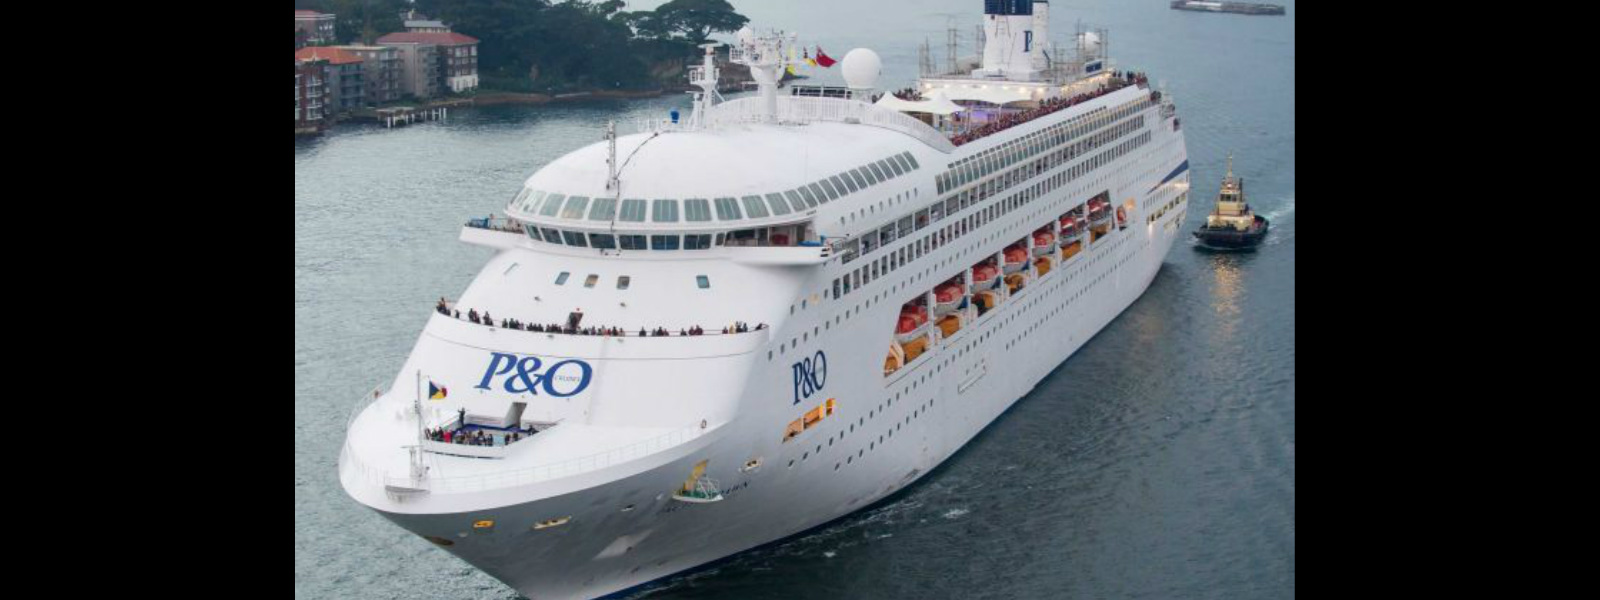 Search for woman who fell from a cruise ship ends